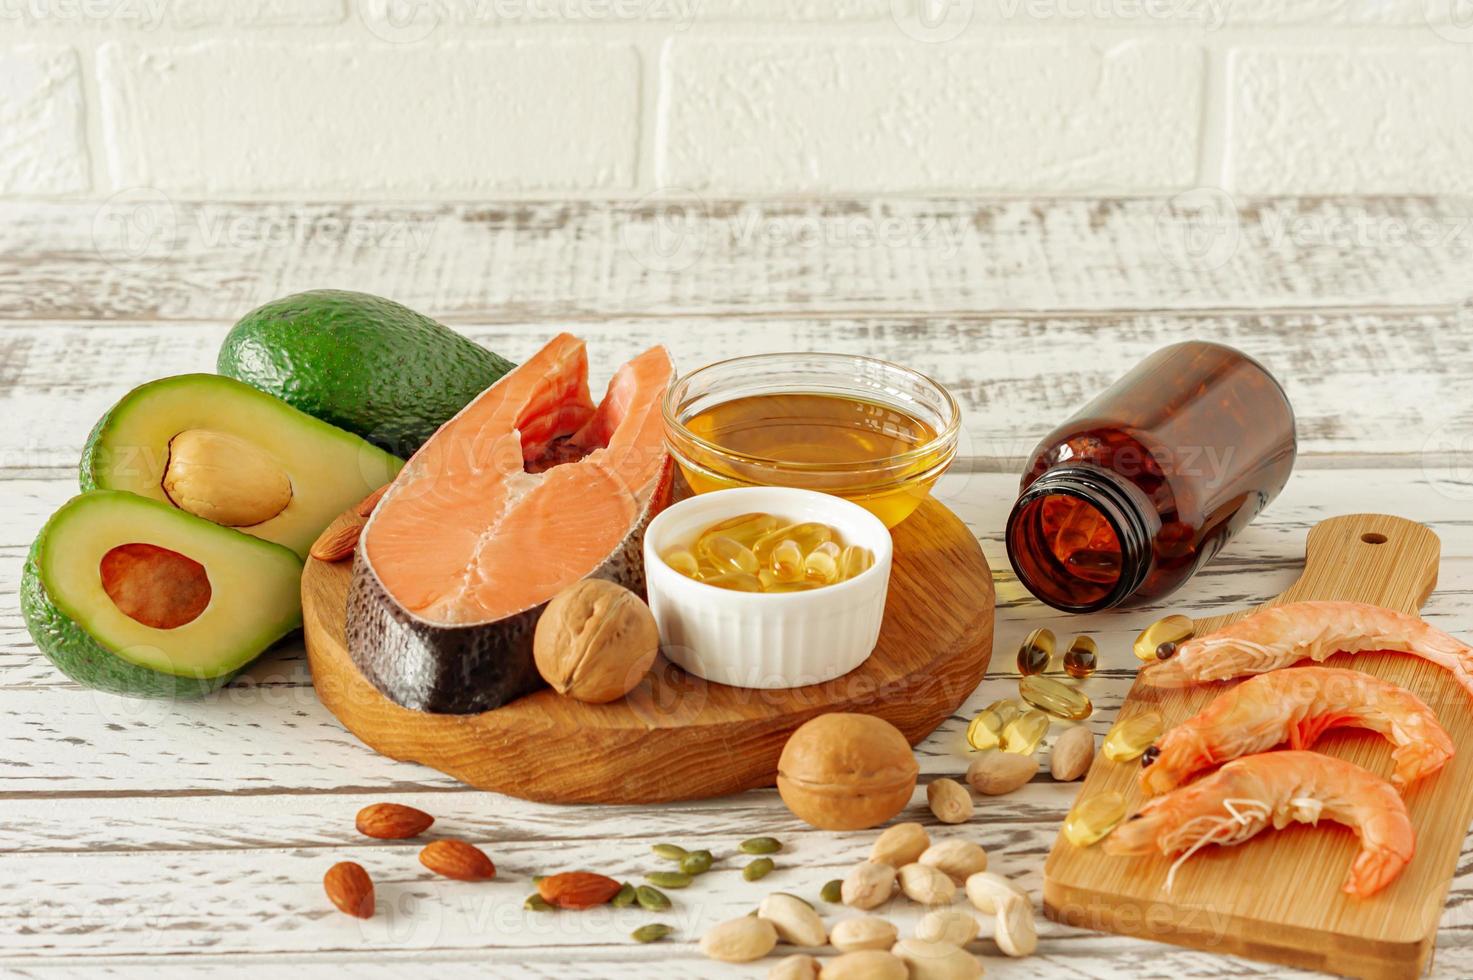 Animal and vegetable sources of omega-3 acids. Balanced diet concept. Assortment of healthy food on woodent table photo